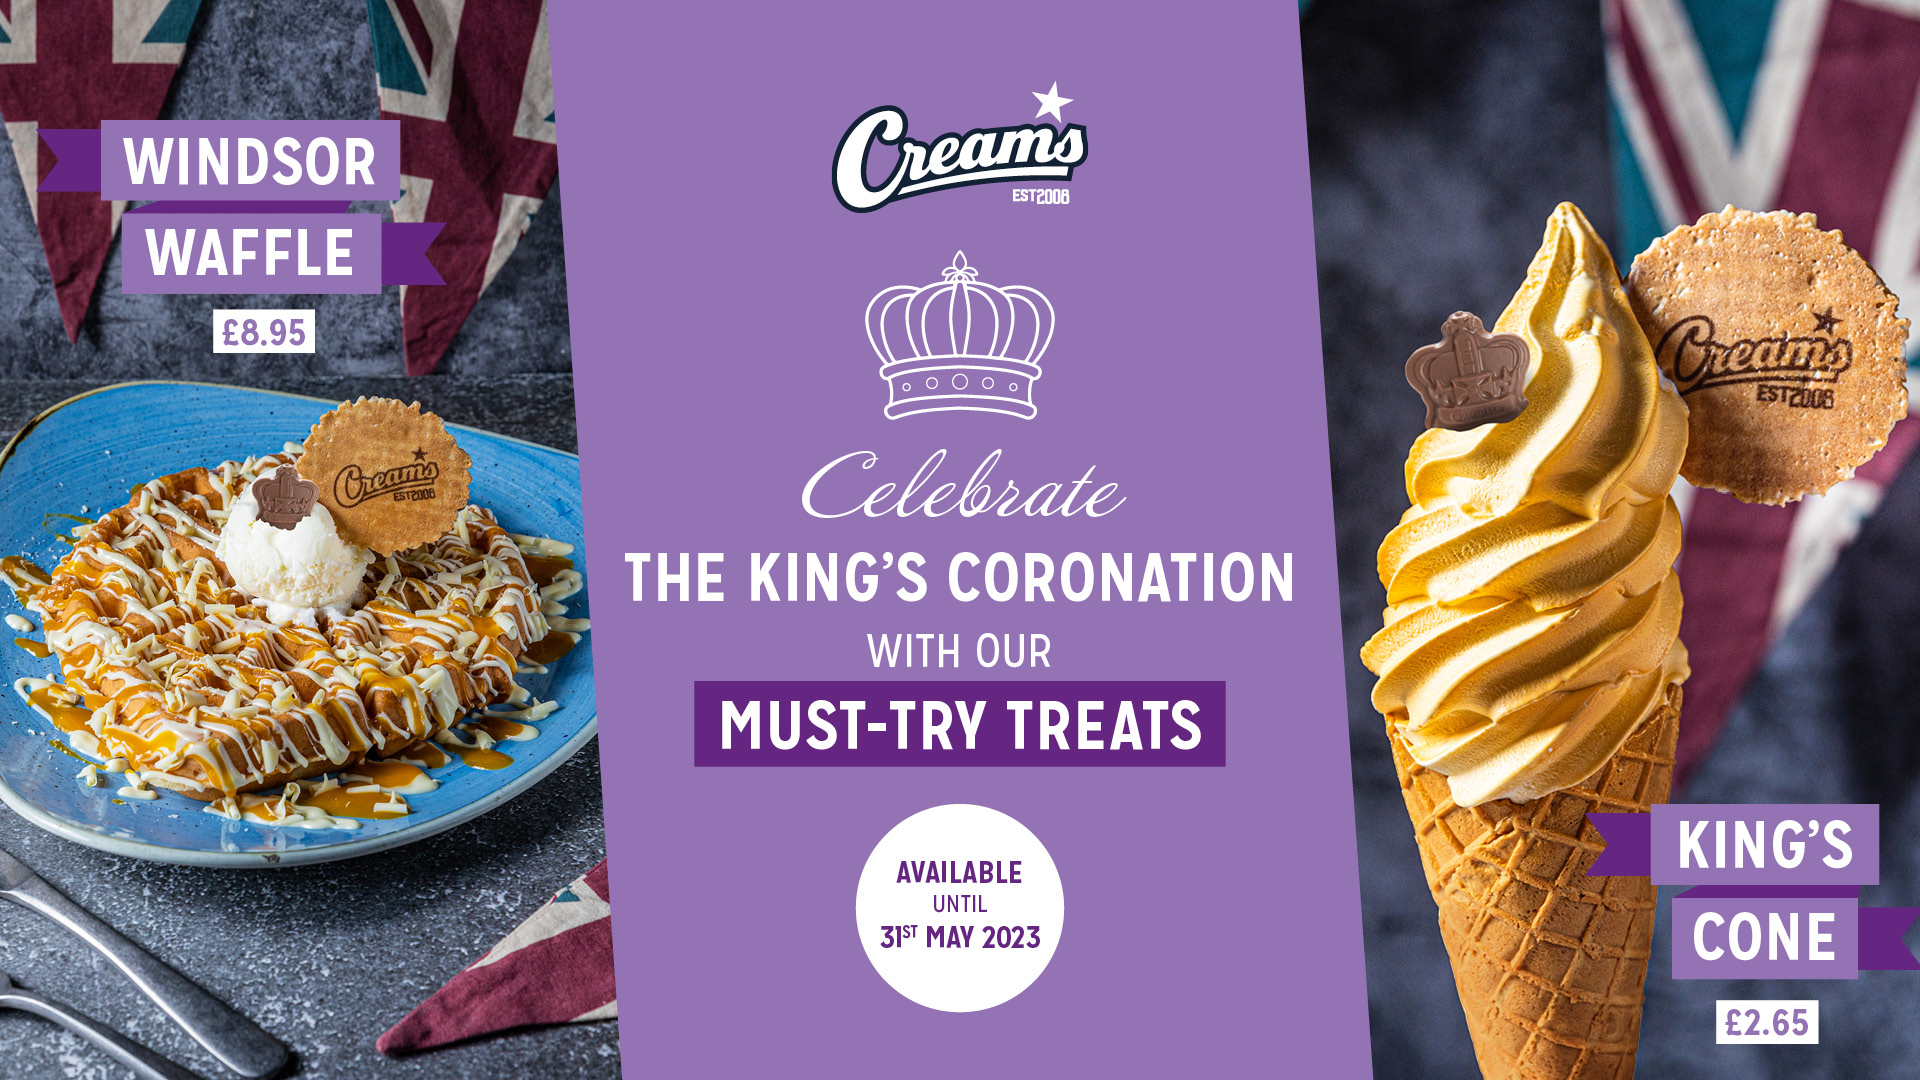 Creams Cafe Coronation Dessert Selection Including the King's Cone and Windsor Waffle